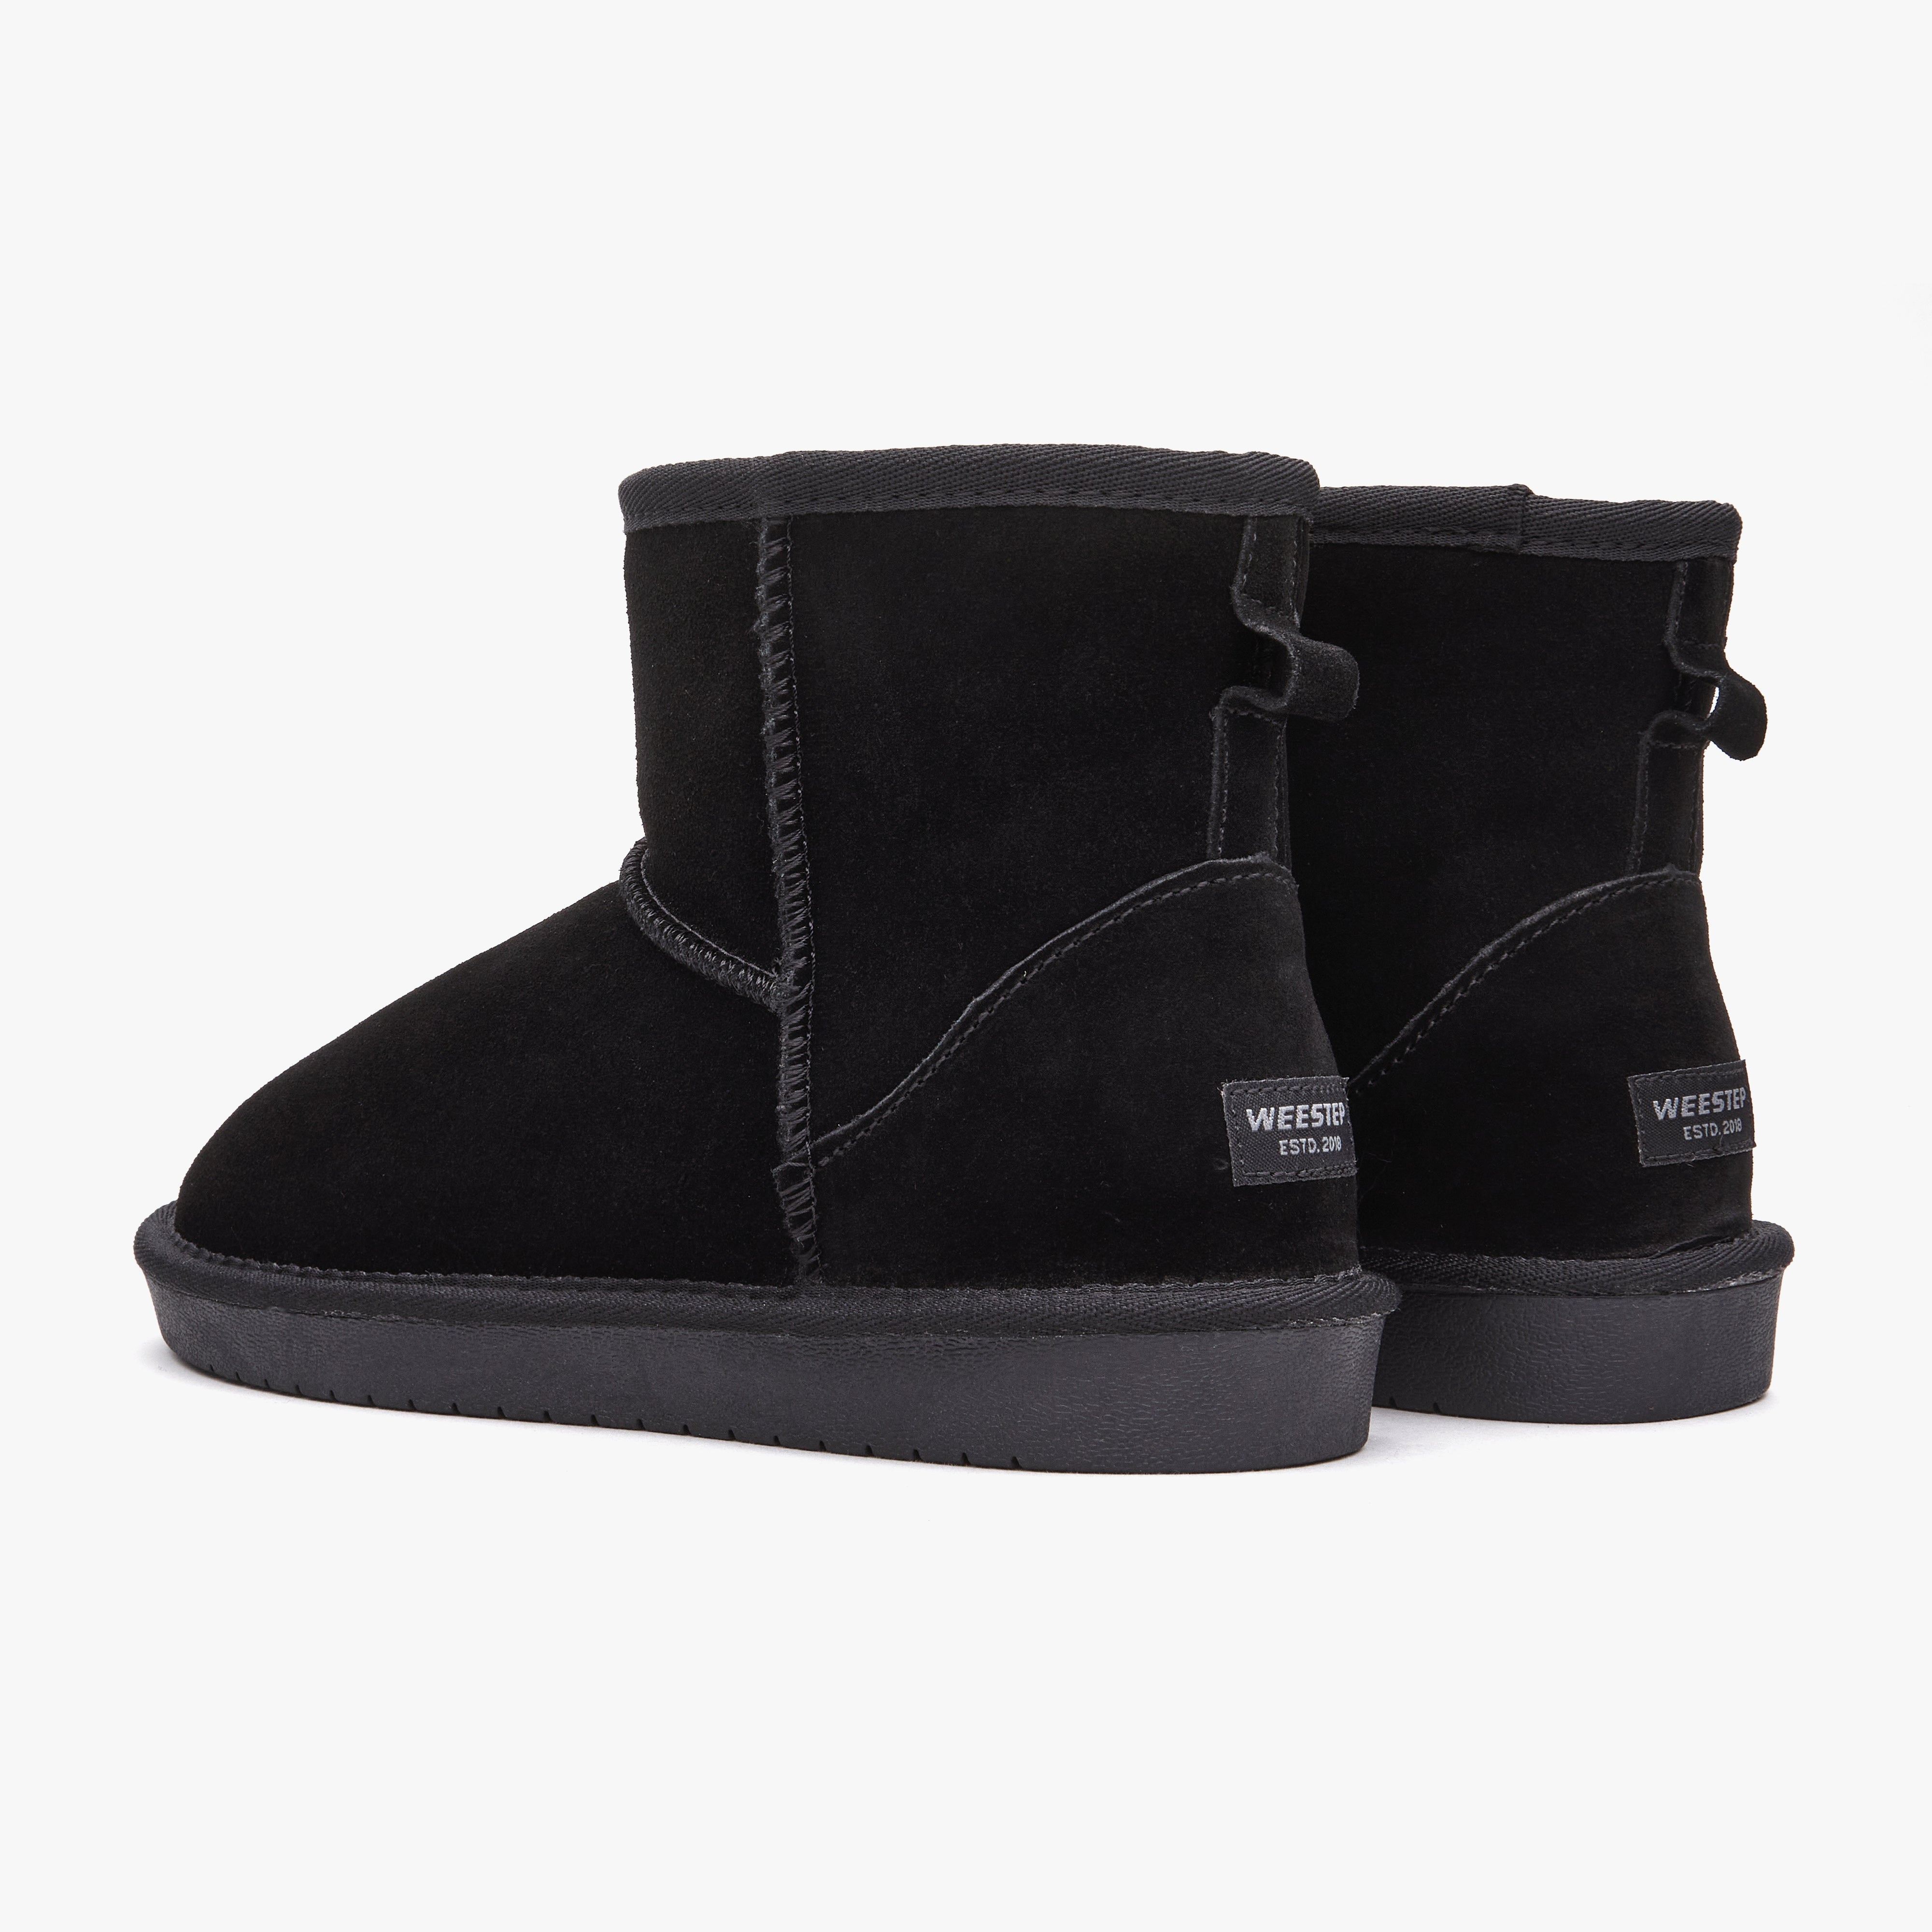 Women Classic Suede Winter Snow Ankle Boots